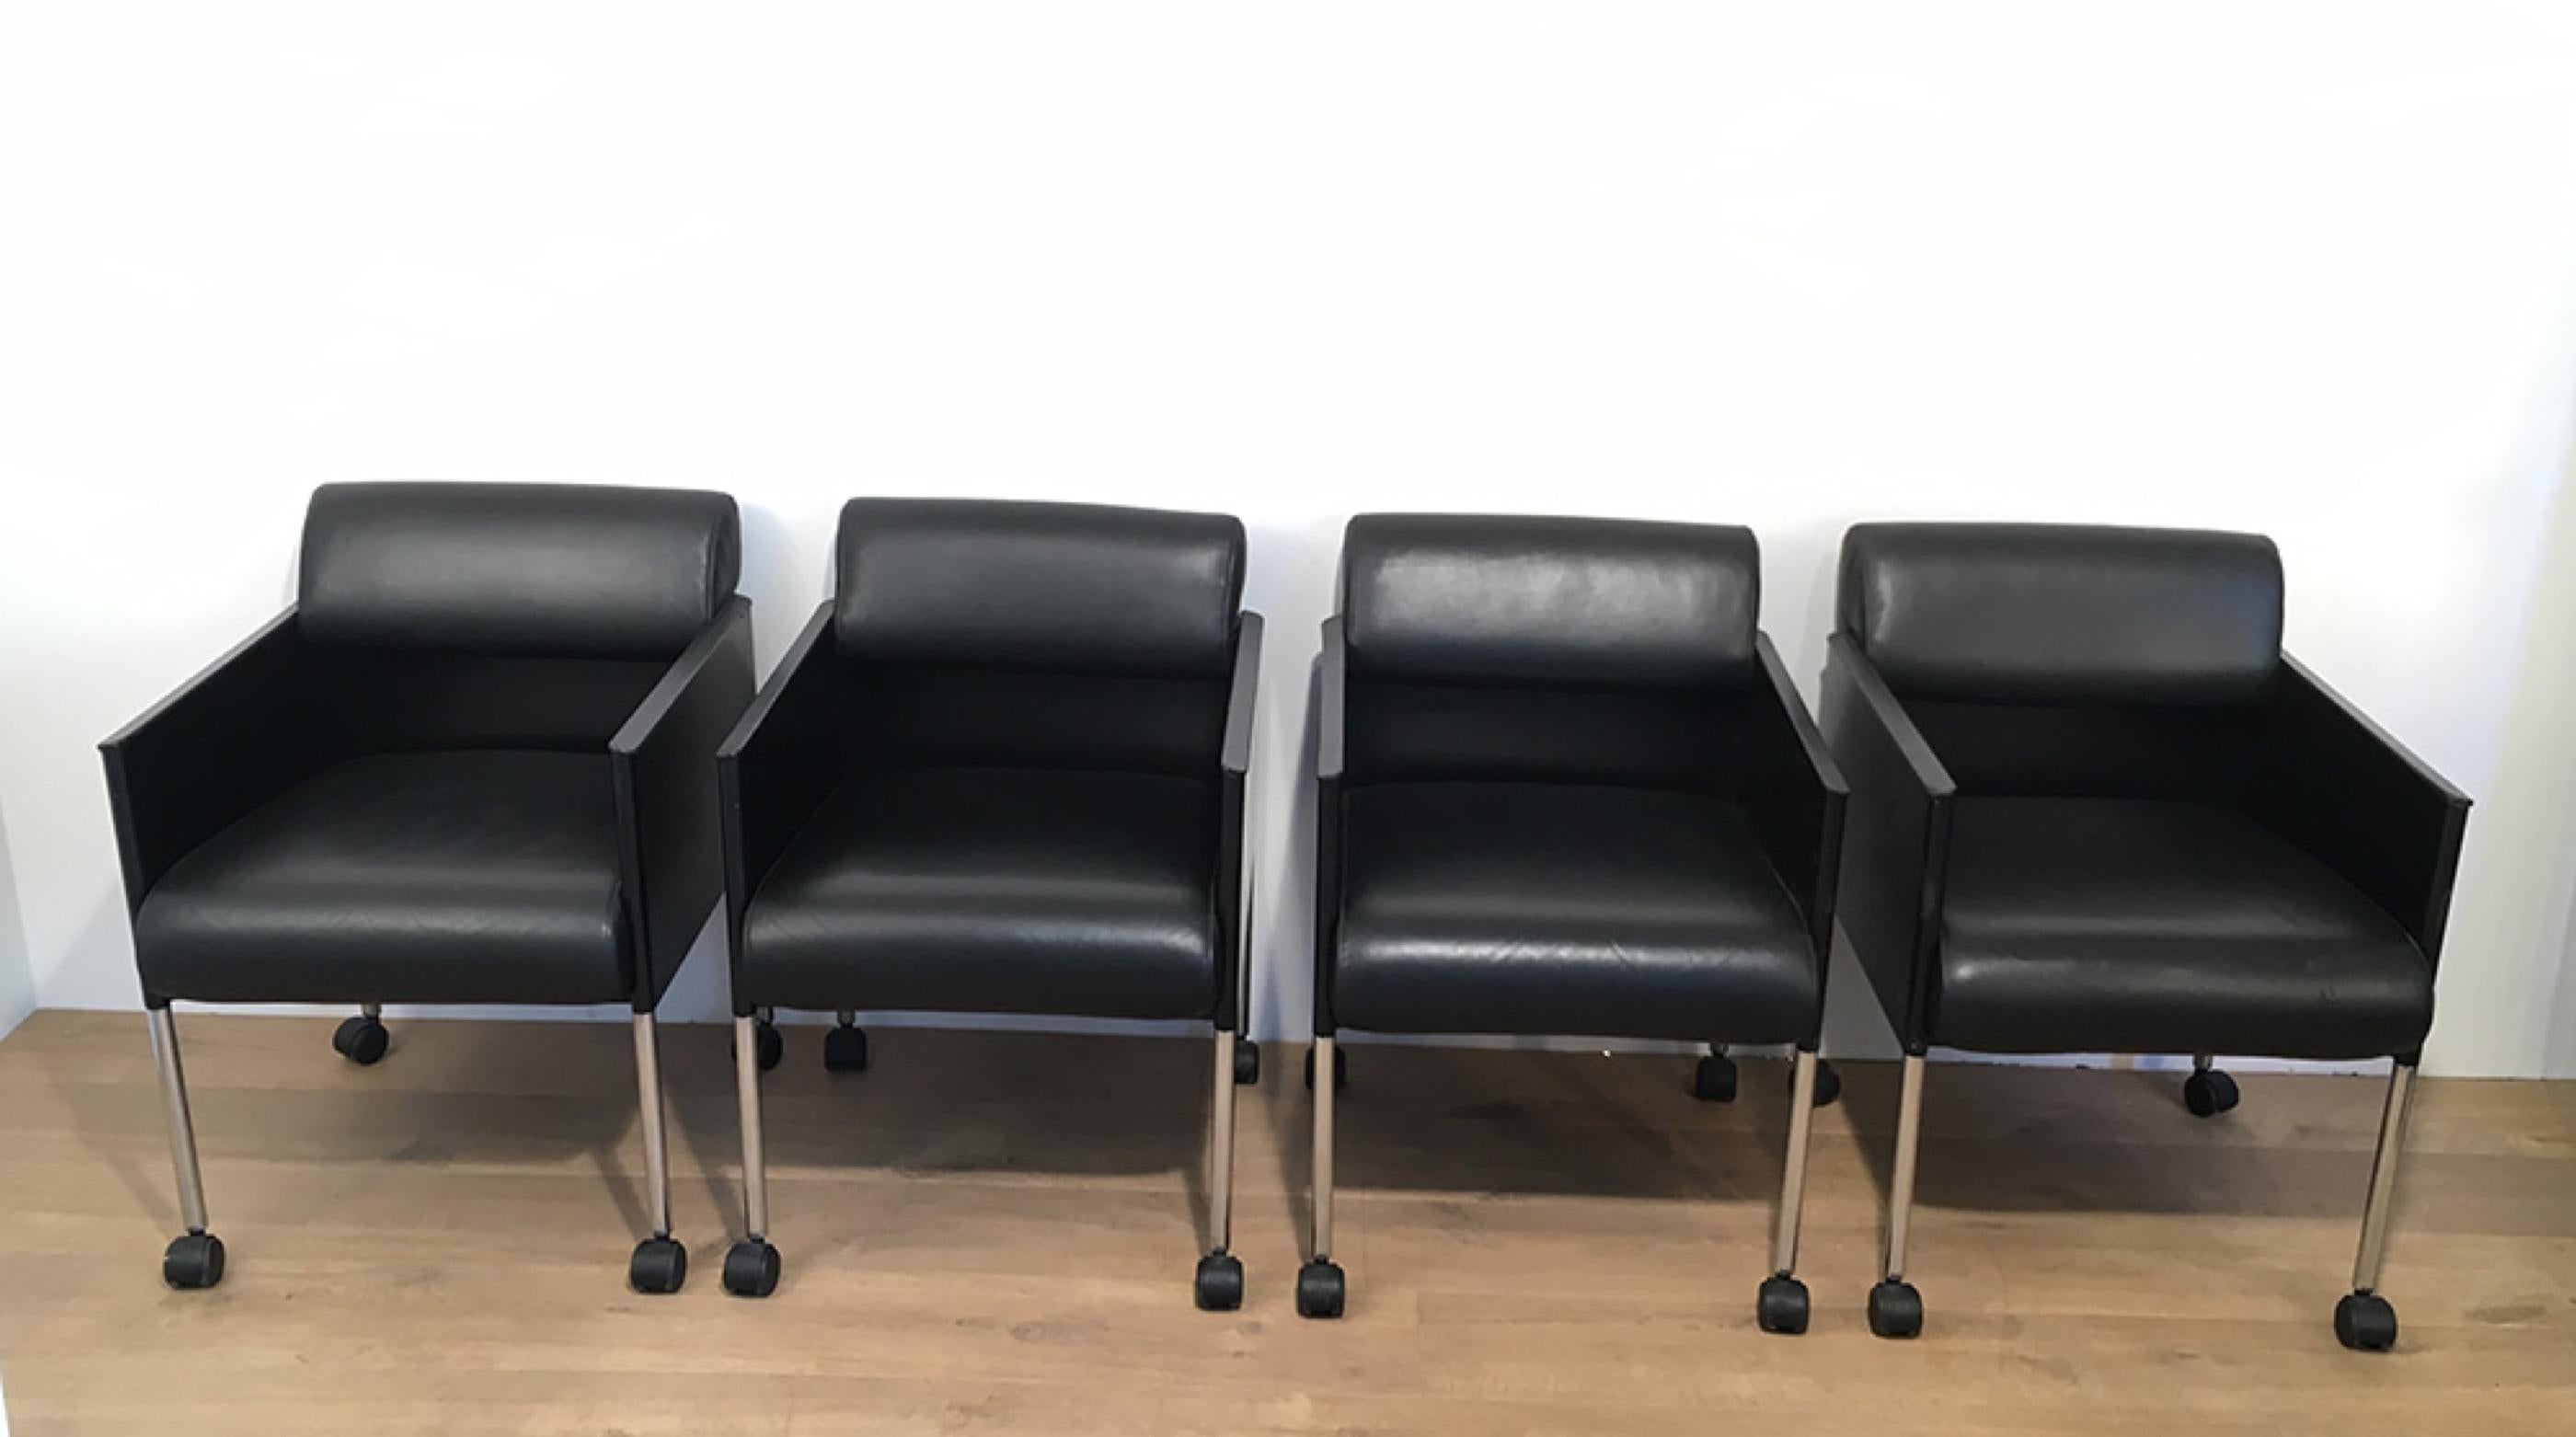 This interesting set of 4 armchairs on casters is signed by Rosenthal. These armchairs are made of black lacquered metal, black molded plastic and leather. These armchairs are very comfortable. They are German, circa 1970.